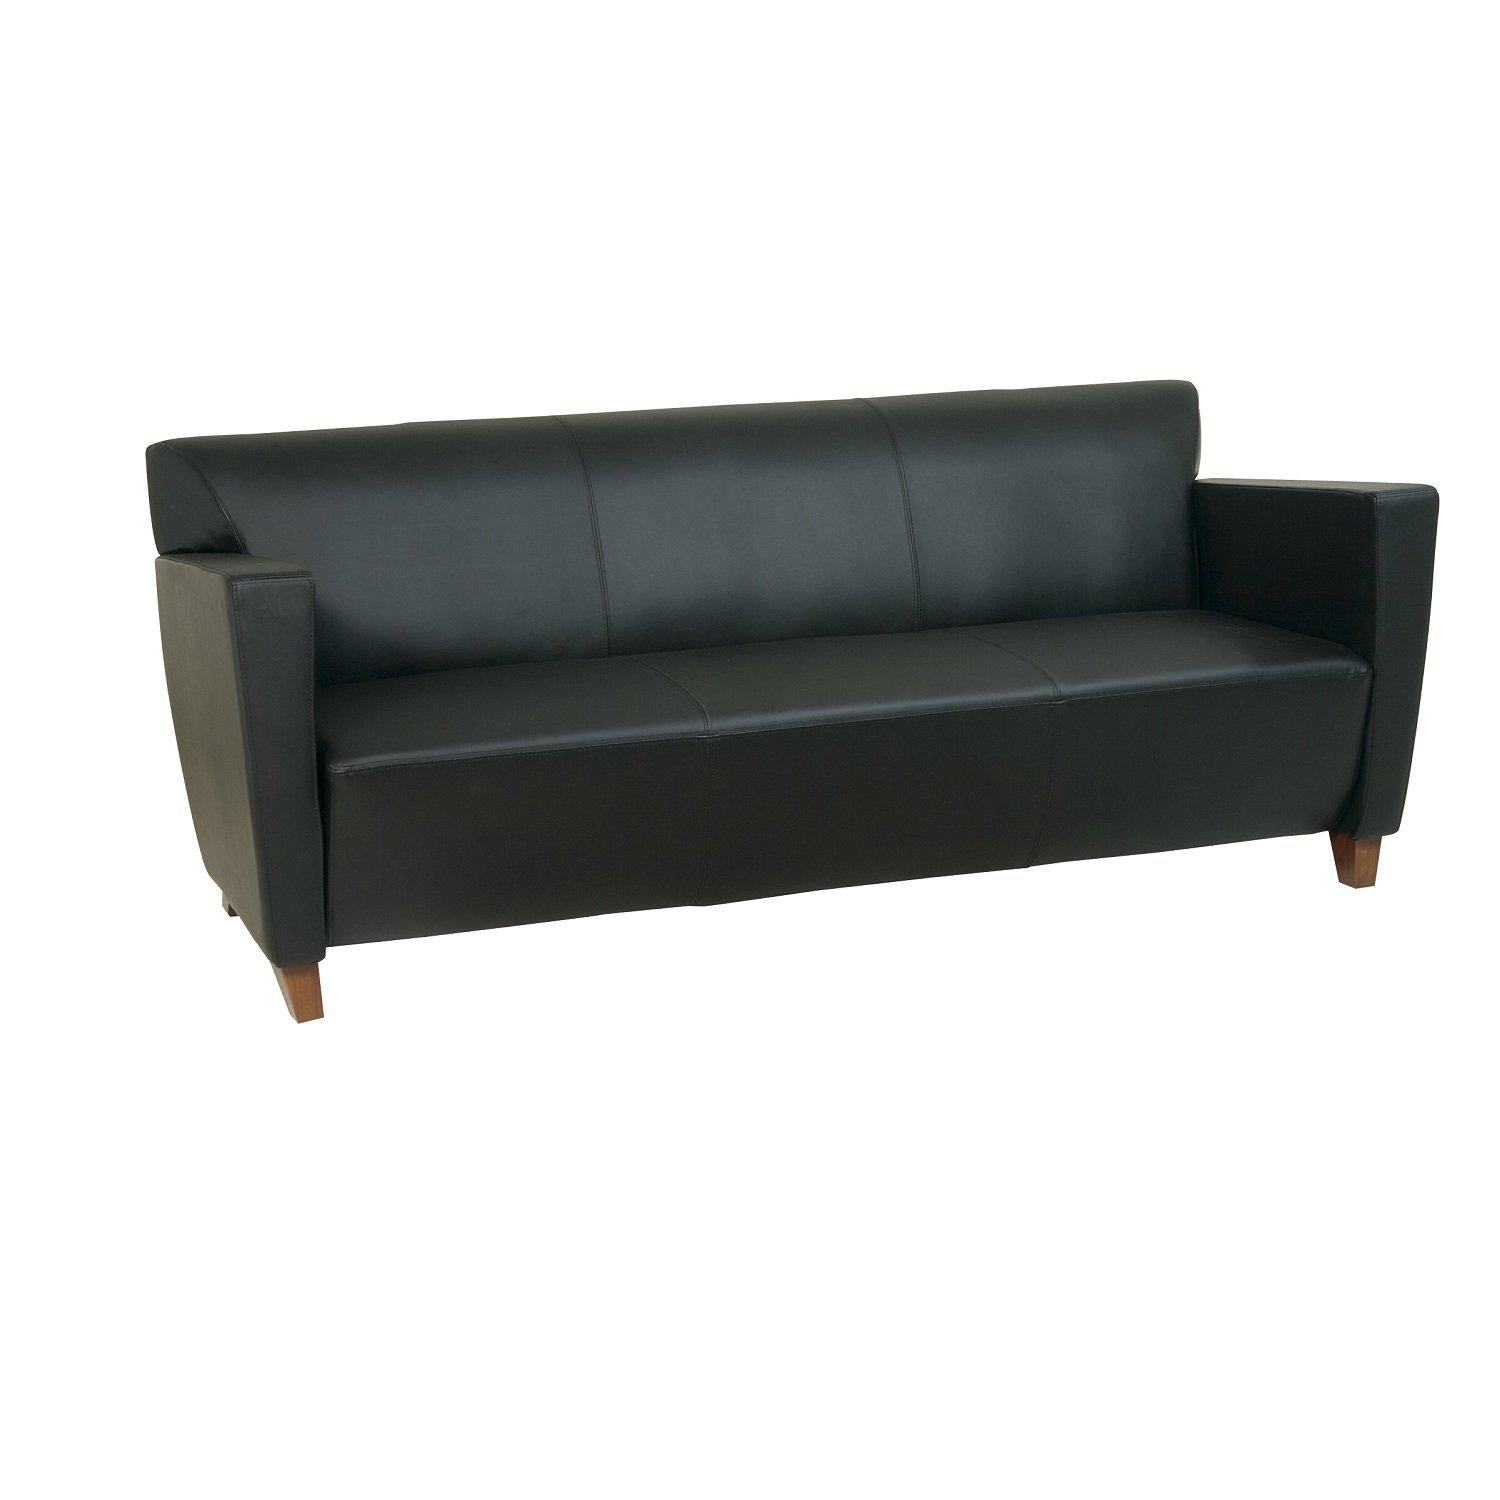 Black Bonded Leather Sofa with Cherry Finish Legs